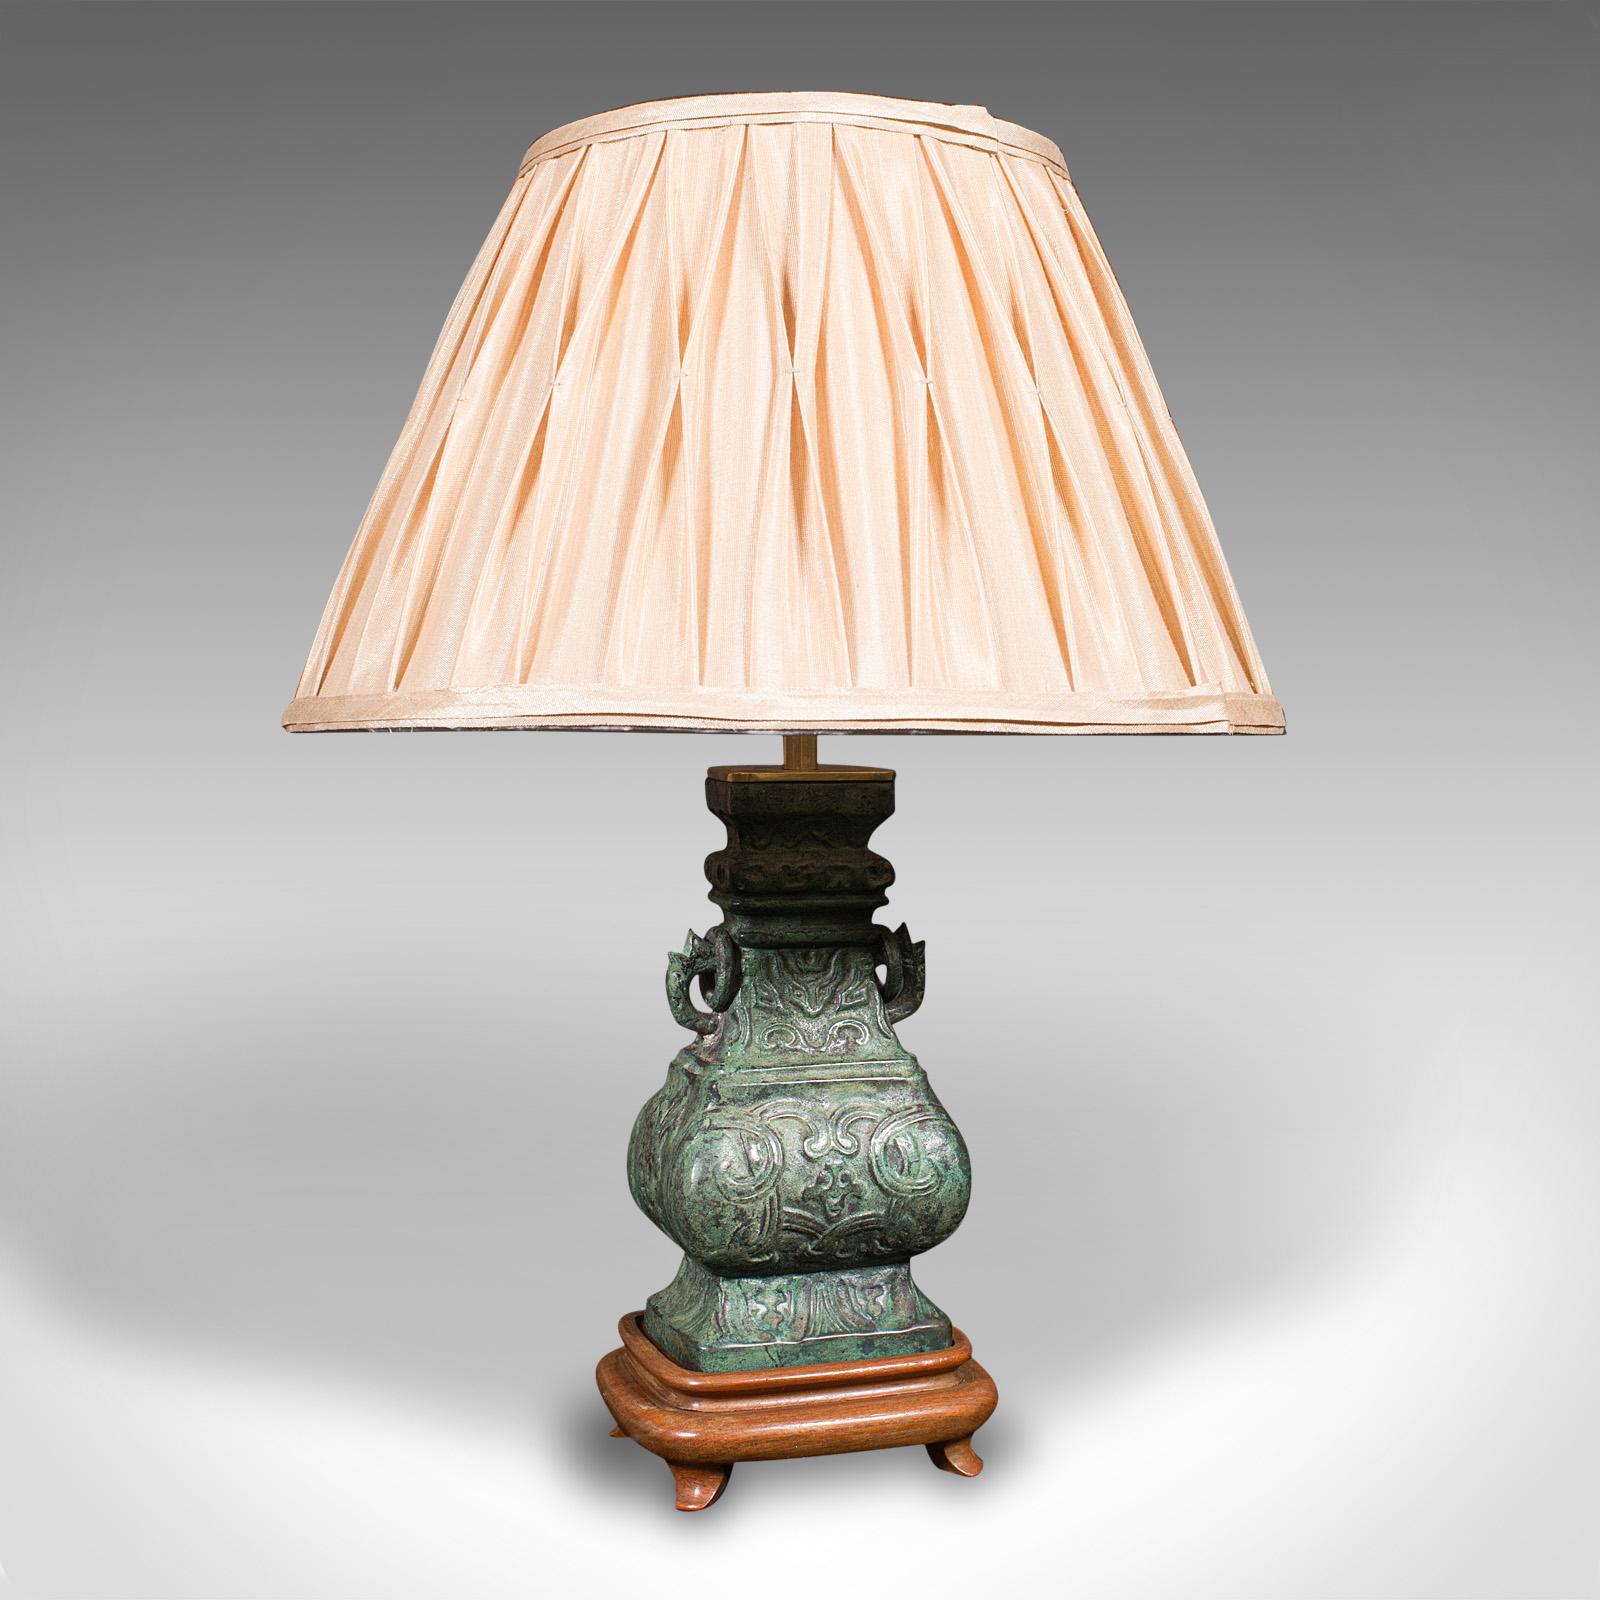 This is a vintage decorative table lamp. A Chinese, bronze over mahogany accent light, dating to the mid 20th century, circa 1960.

Of appealing finish and proportion, ideal for the side table
Displays a desirable aged patina throughout
Bronze